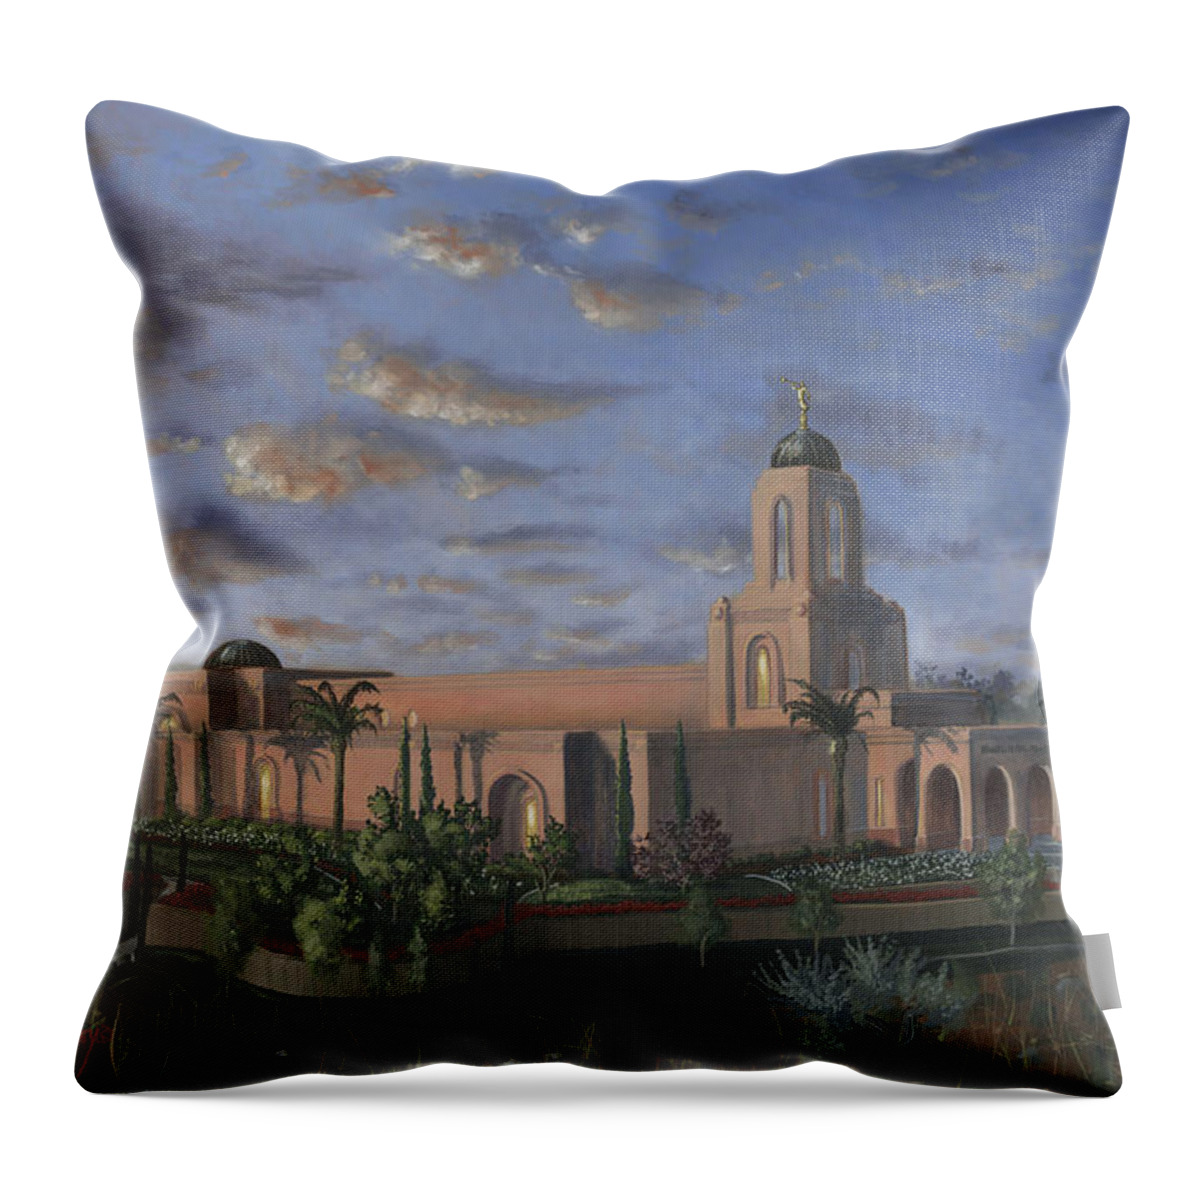 Temple Throw Pillow featuring the painting Newport Beach Temple by Jeff Brimley